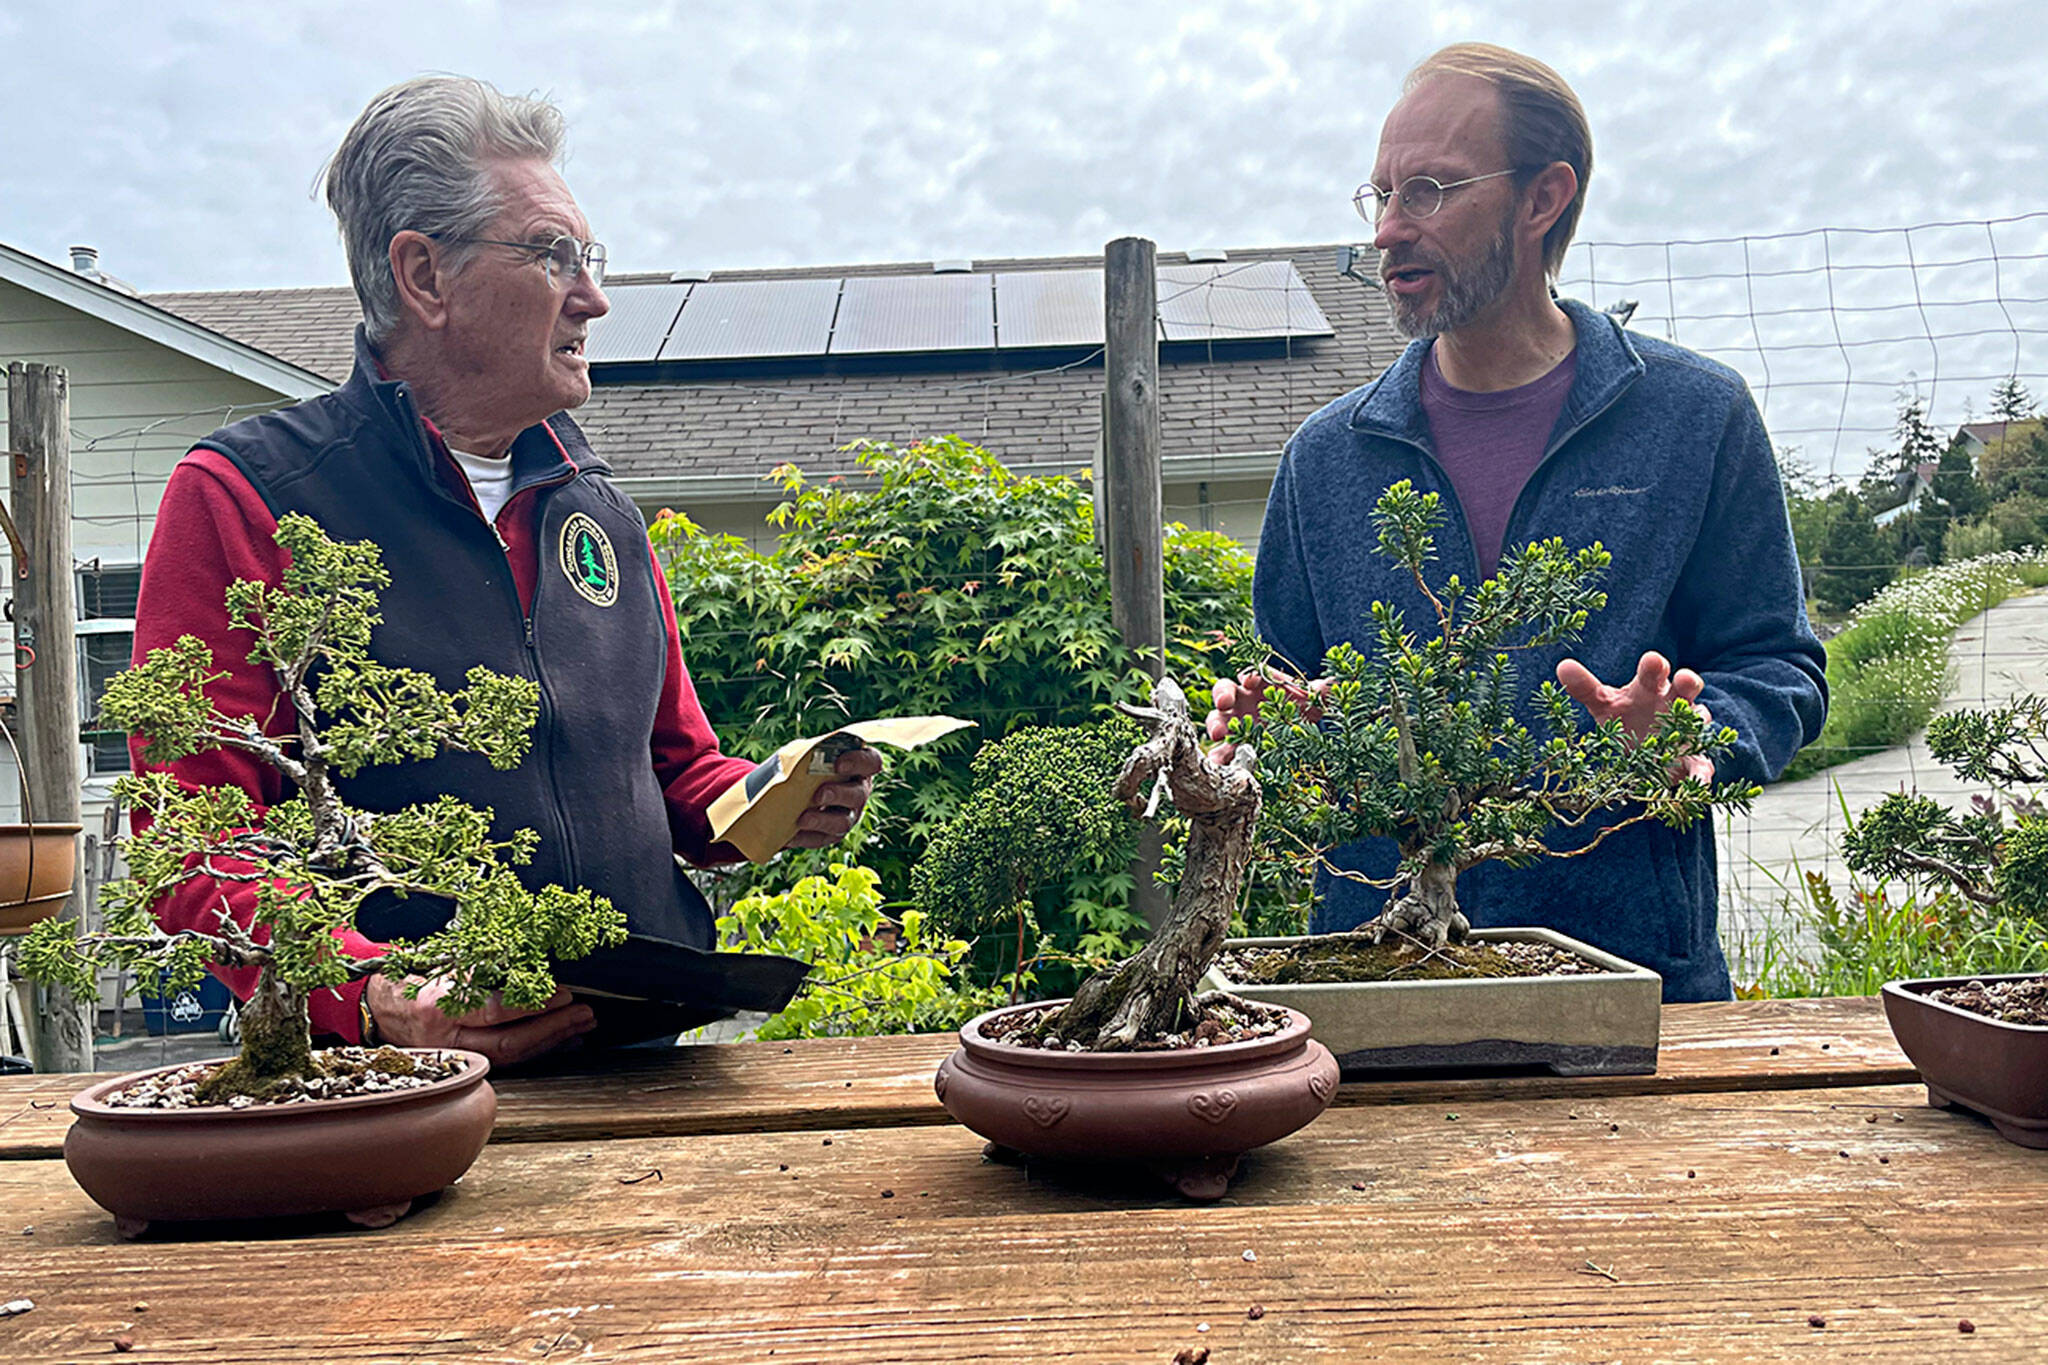 Sequim Gazette photo by Matthew Nash
Ron Quigley and Evan Miller with the Dungeness Bonsai Society are two of the 30 club members who will show their bonsai trees on June 3 at Sequim’s Pioneer Memorial Park.